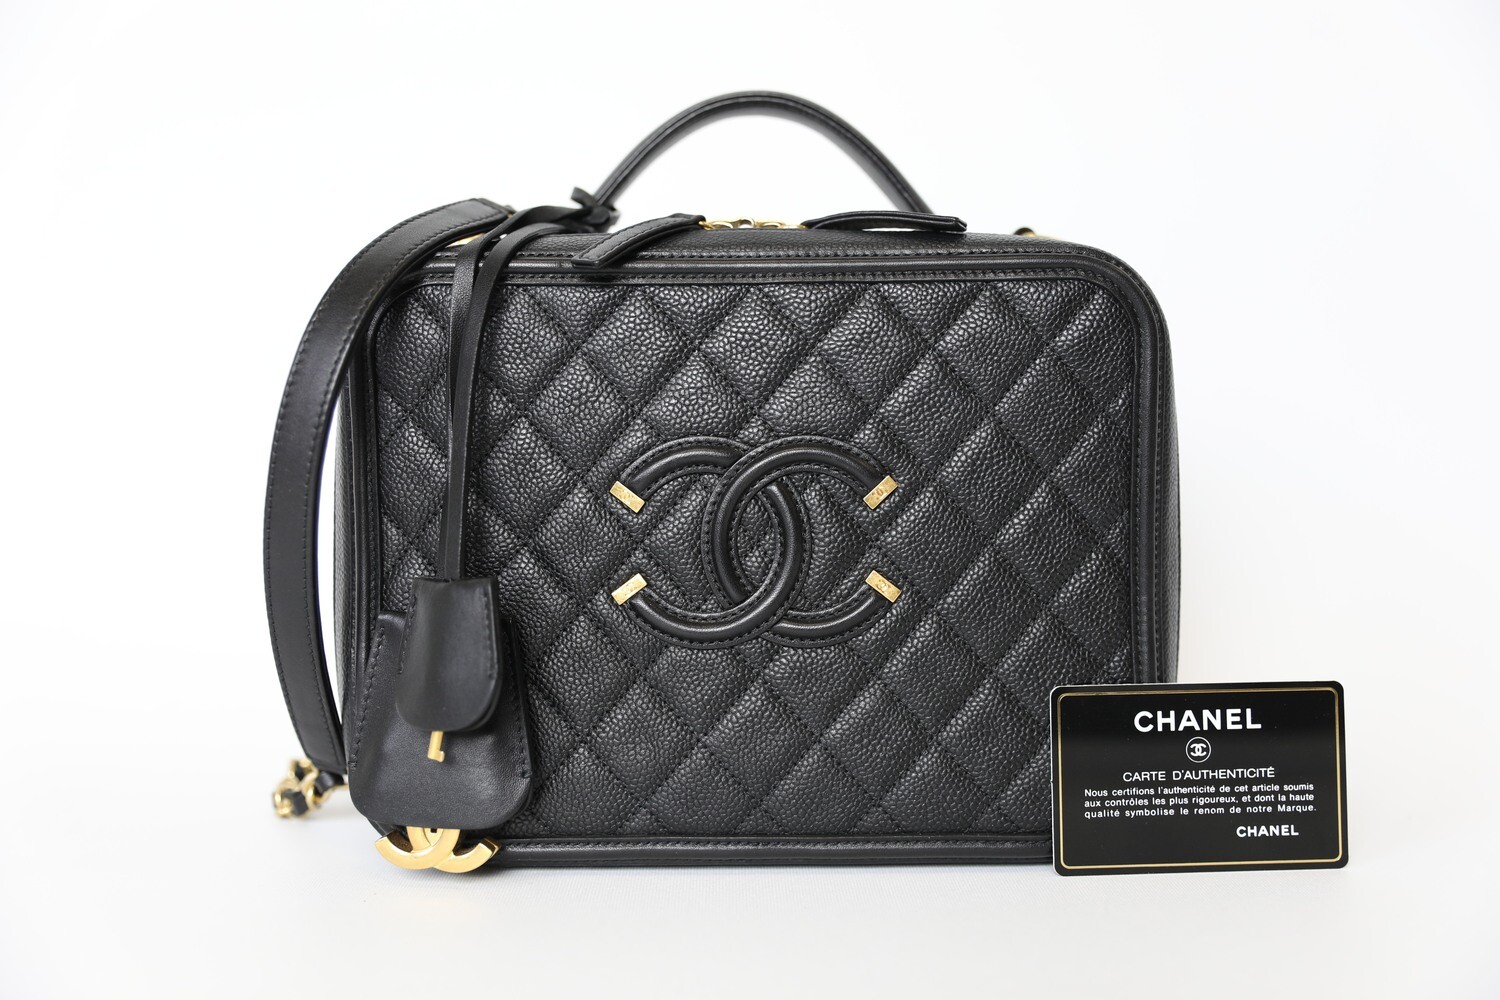 Chanel 19 Large, Grey Leather, Preowned in Dustbag WA001